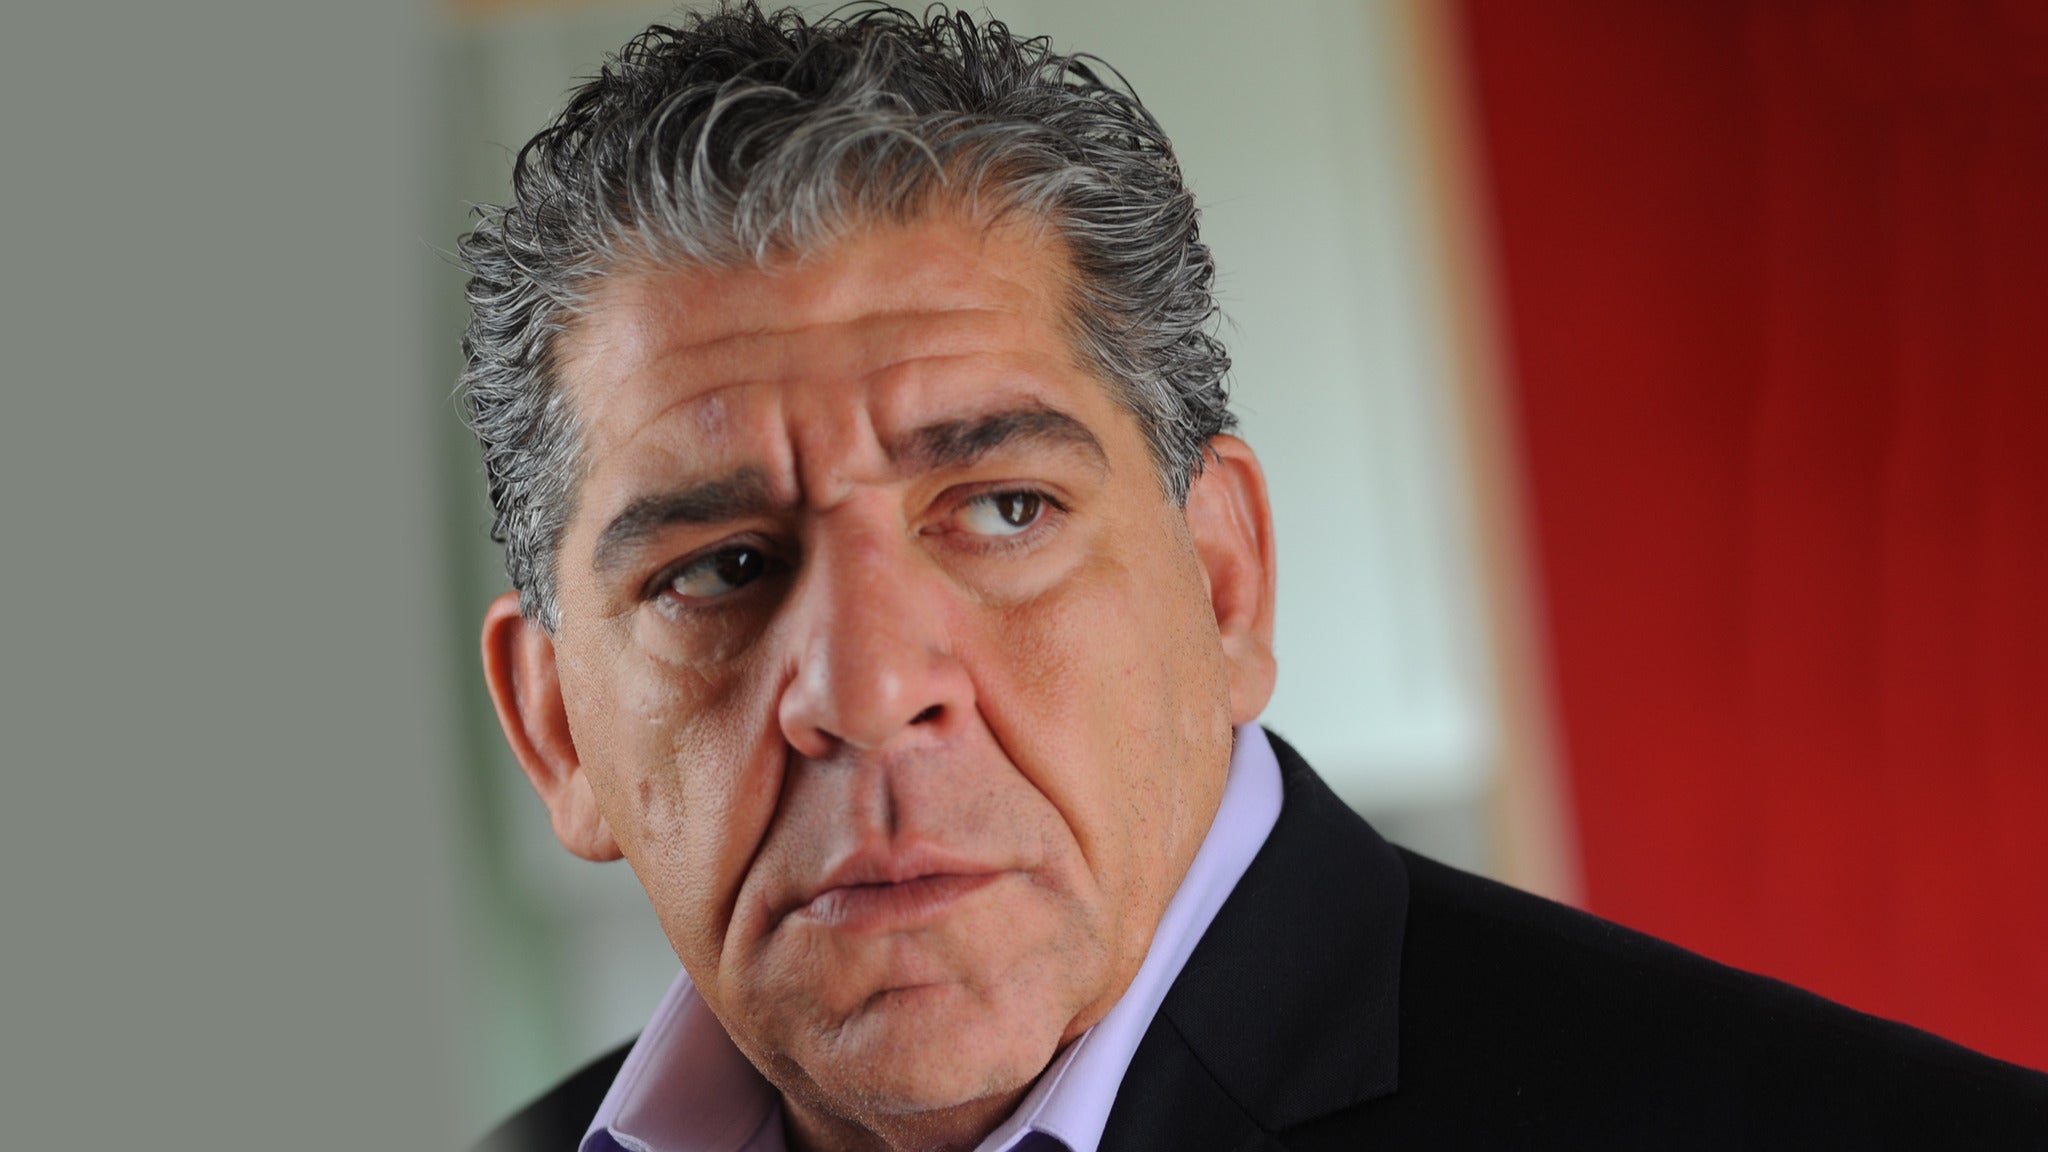 Joey Diaz: The 56 and Still Slinging Dick Tour in New York promo photo for Artist presale offer code